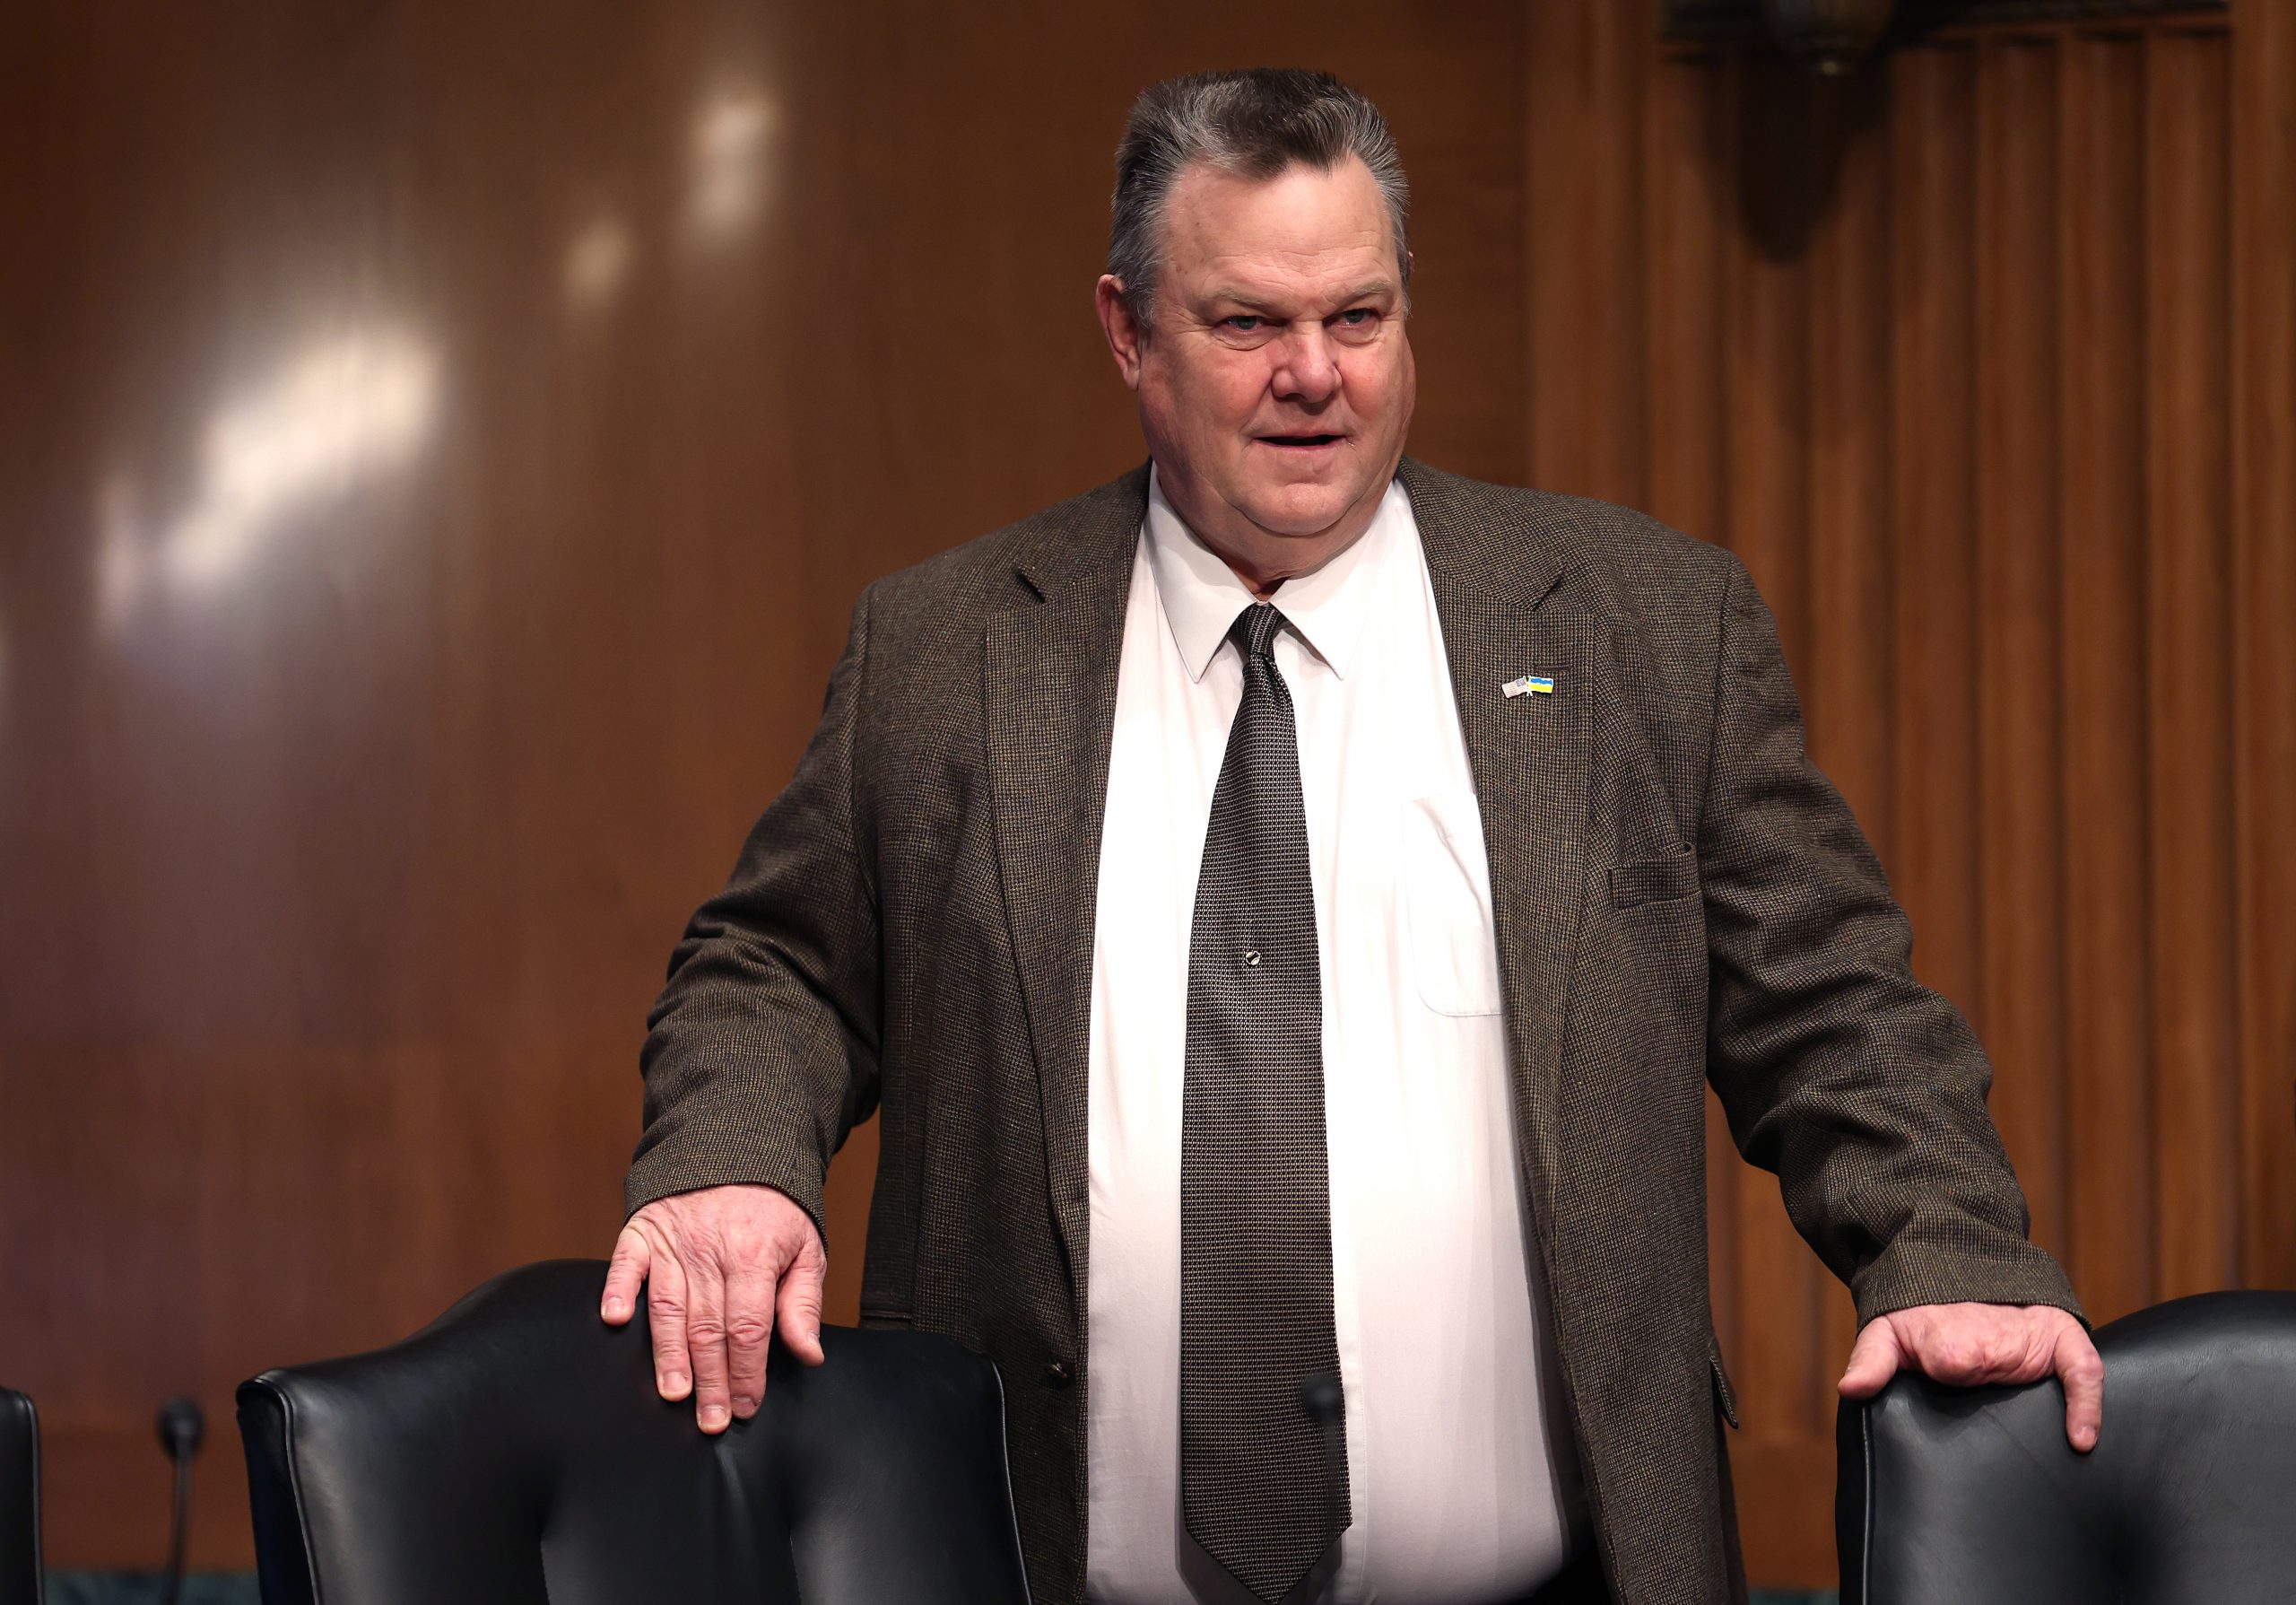 Jon Tester Won a Prize for Fighting Dark Money. He’s Been Relying on It for Years.